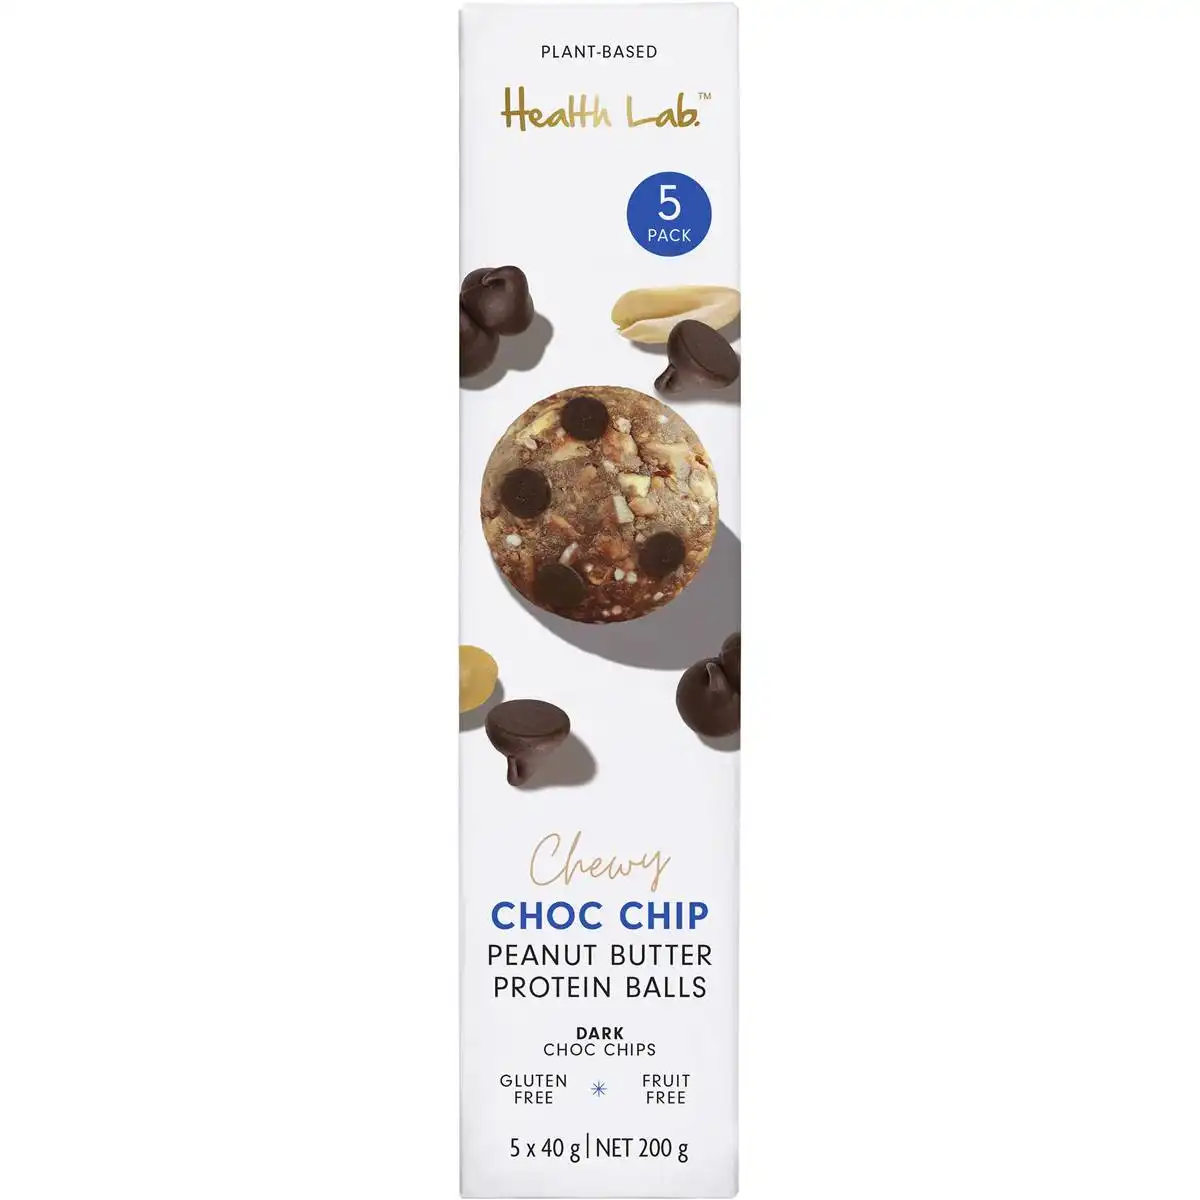 Health Lab Chewy Choc Chip Peanut Butter Protein Balls 5 Pack now $10(was $12.75, Save $2.75)